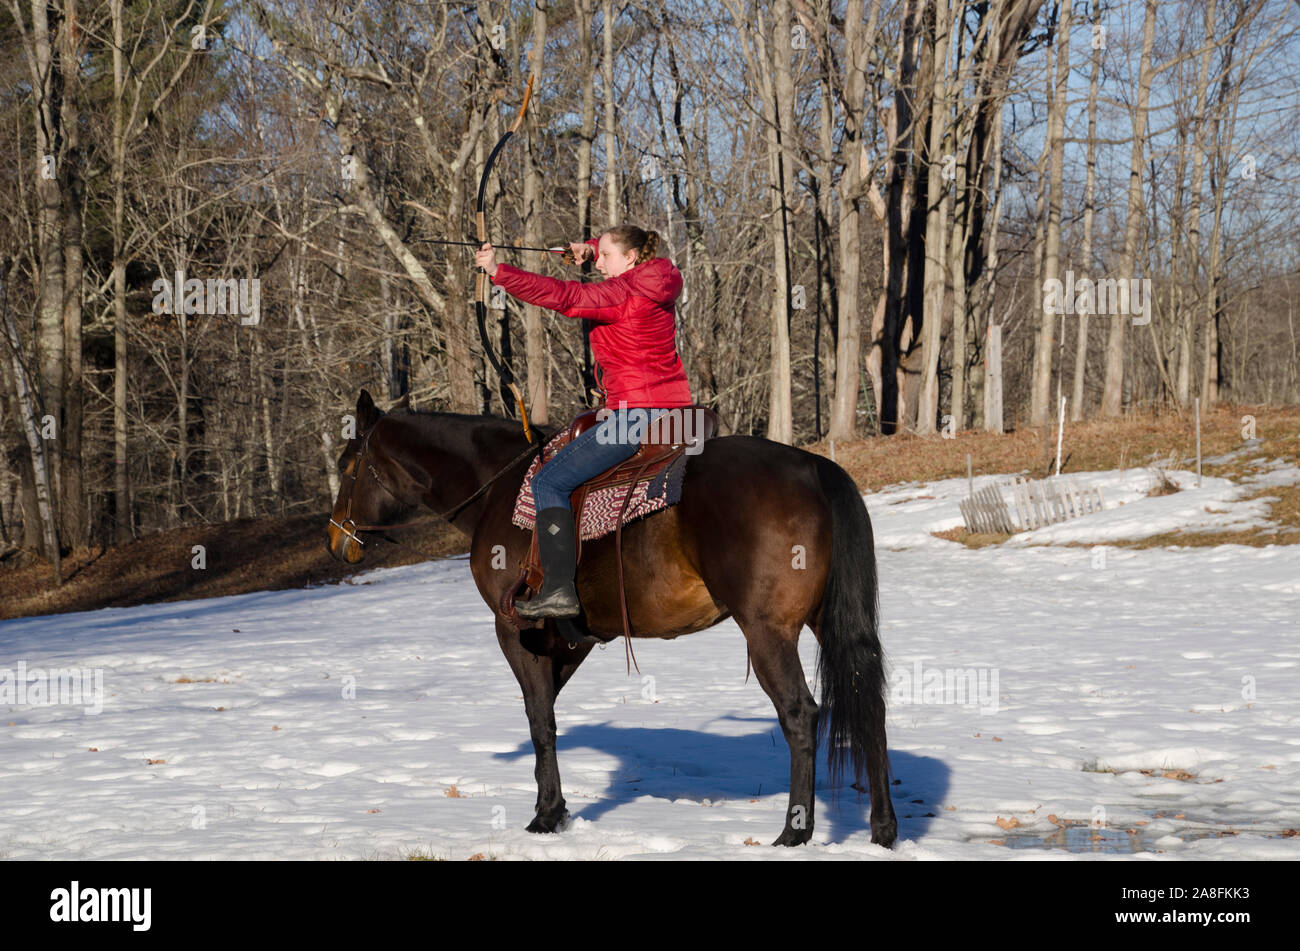 Young woman shooting archery on horseback. Quarter horse and the archer practicing aim, Maine, USA Stock Photo